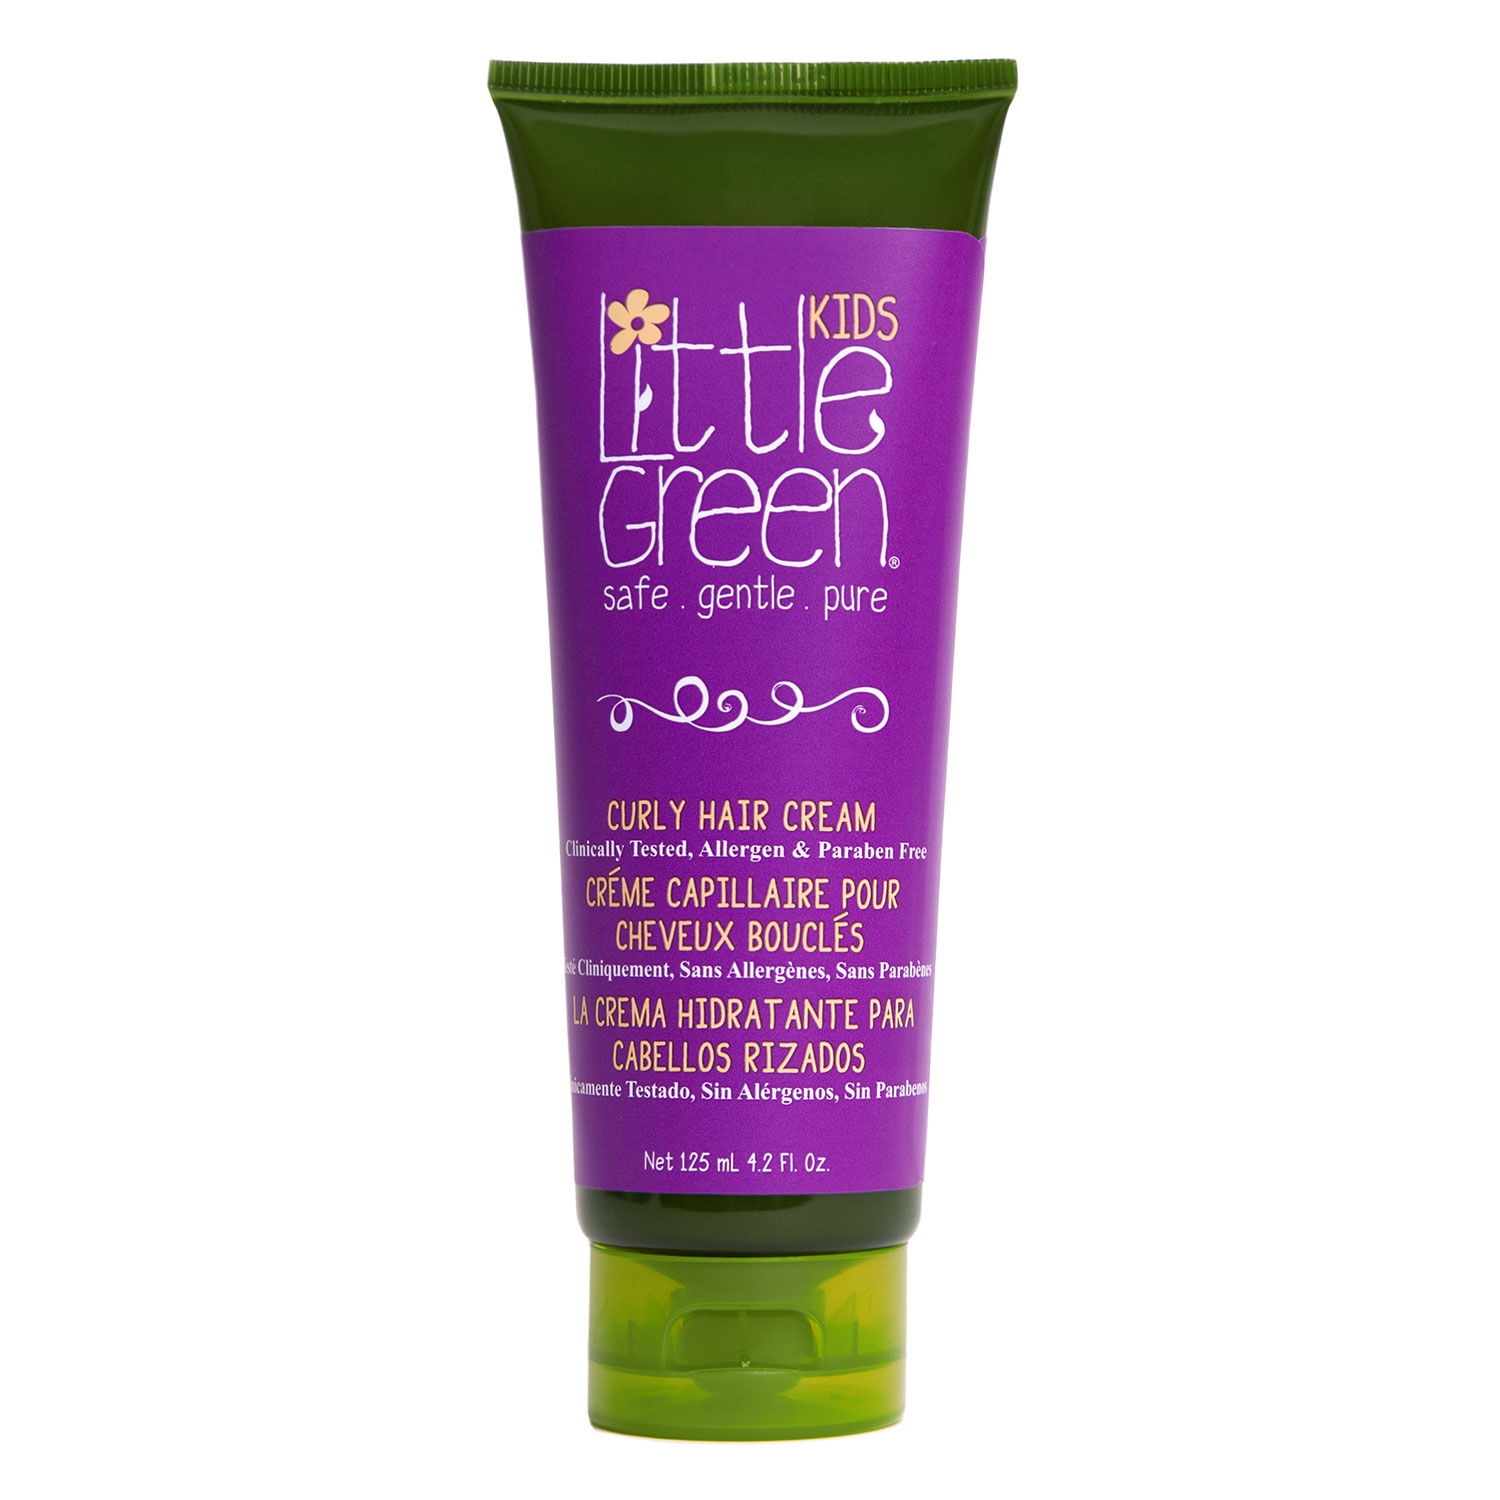 Product image from Little Green Kids - Curly Hair Cream